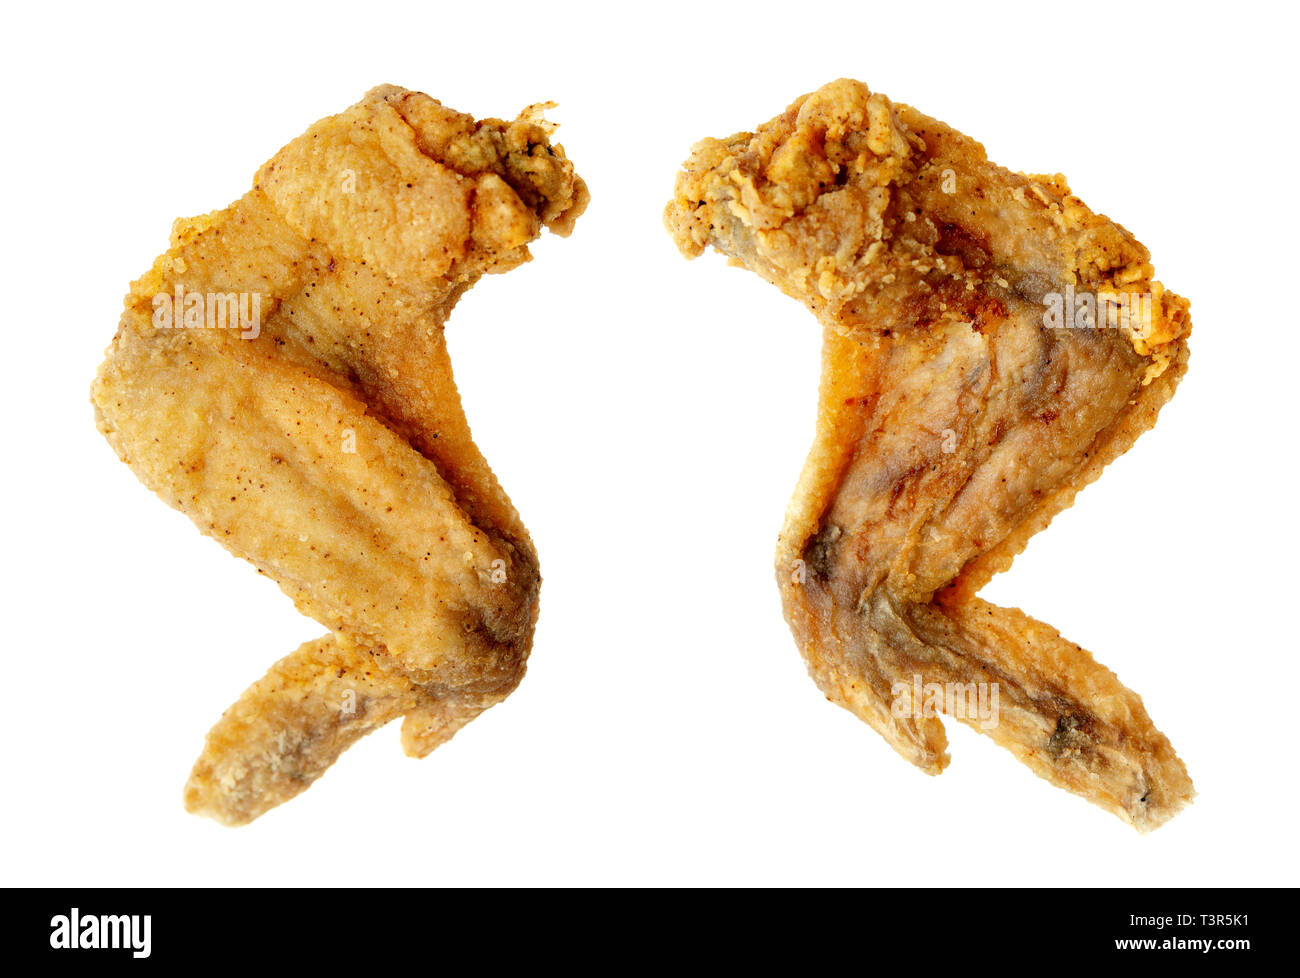 Original recipe fried chicken wings, isolated on white background. Stock Photo